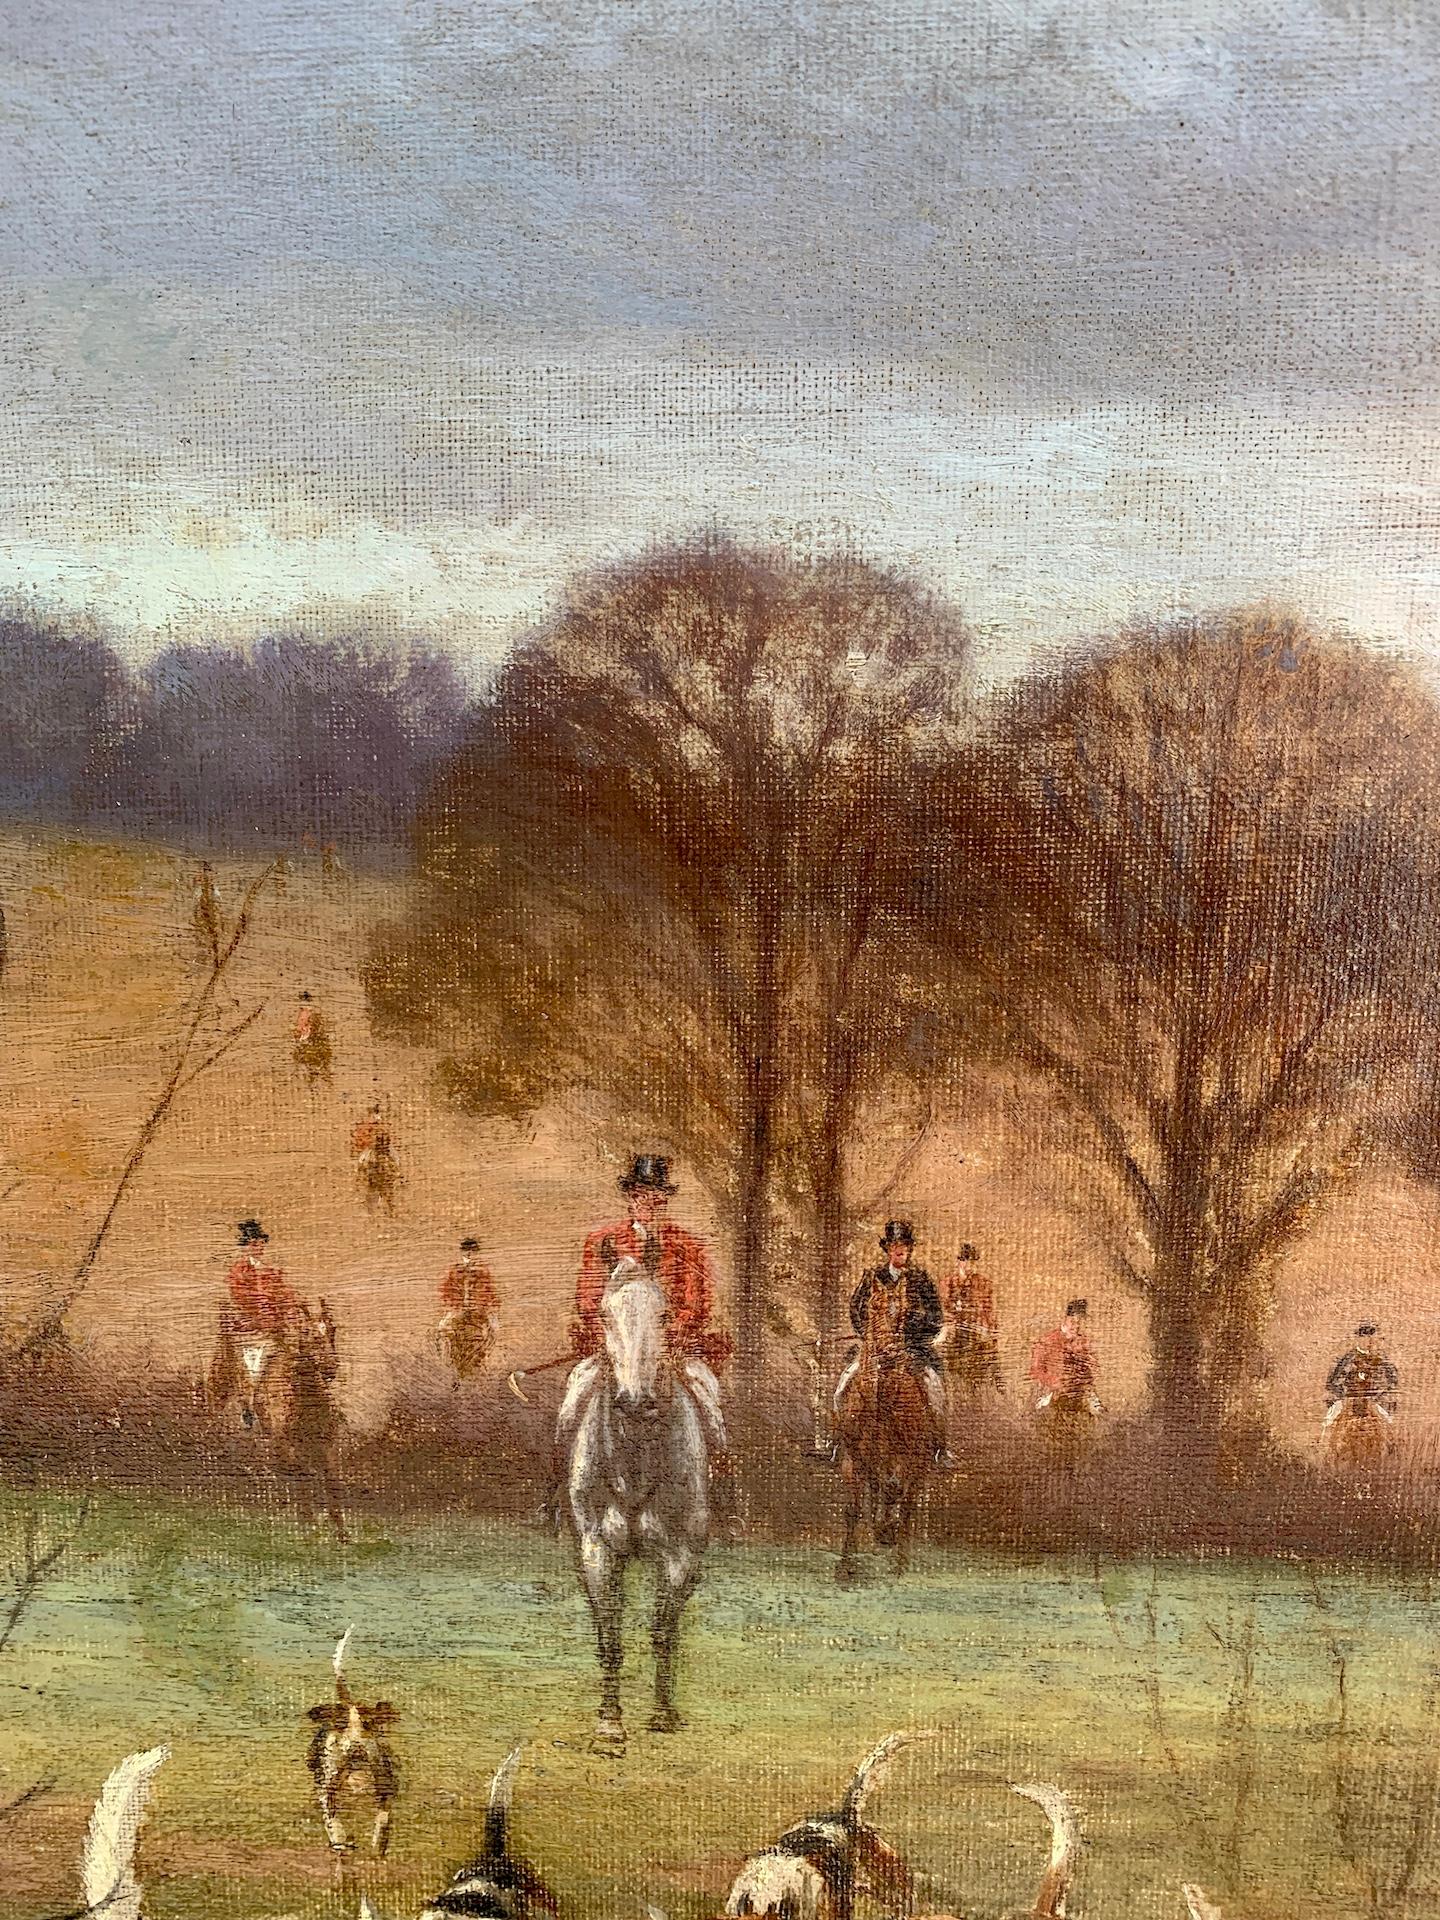 Early 20th-century English oil painting with the subject taken from one of Robert Bloomfield's poems, The Farmers Boy.

